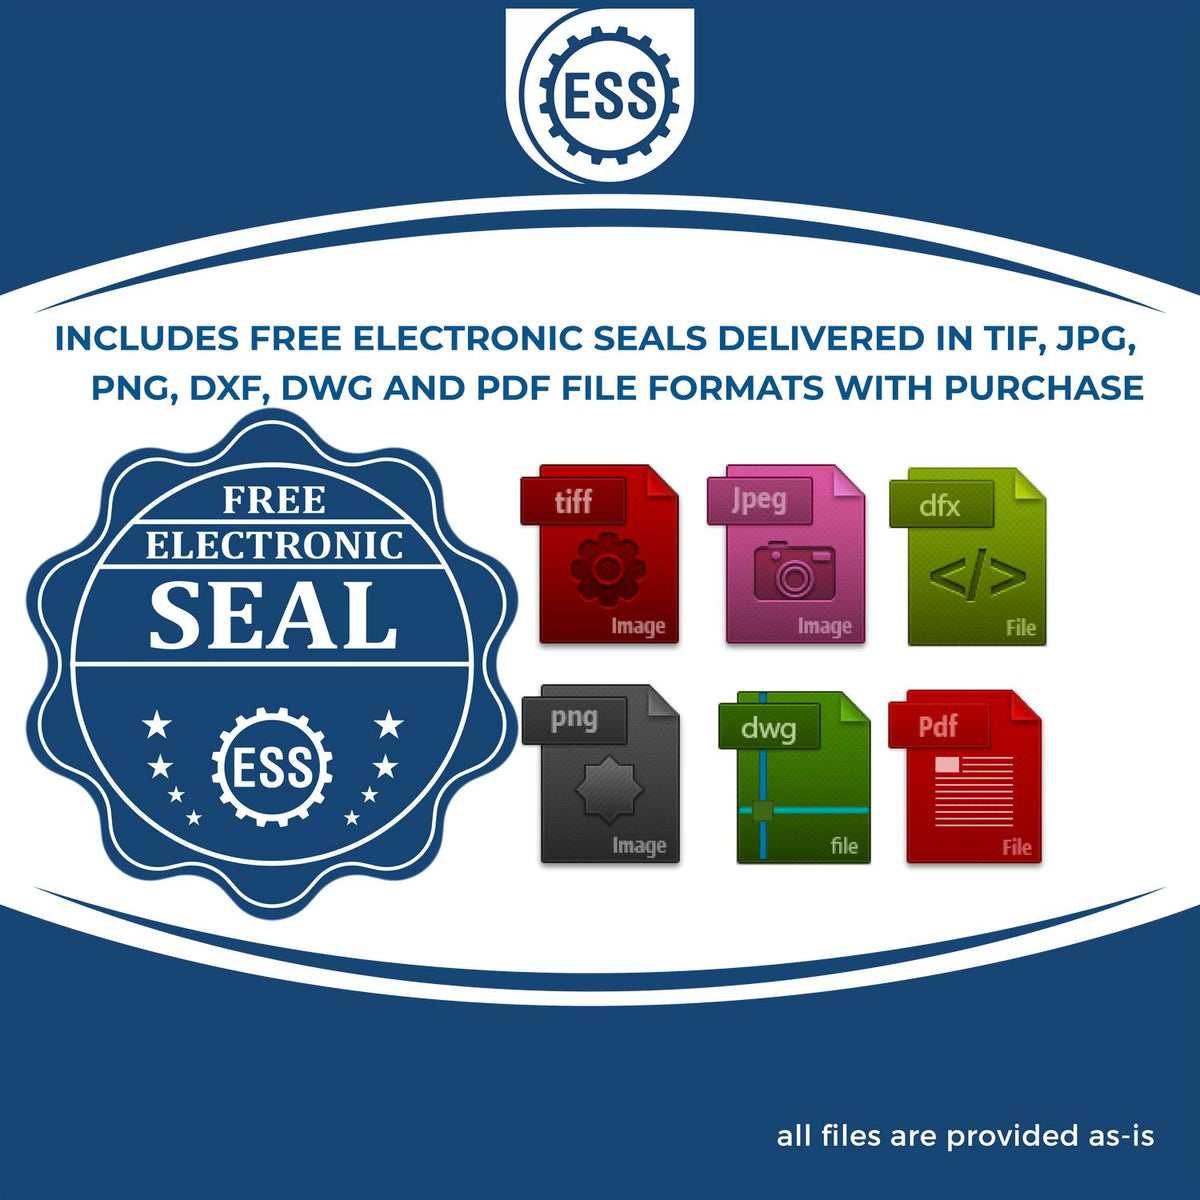 An infographic for the free electronic seal for the State of Maryland Long Reach Architectural Embossing Seal illustrating the different file type icons such as DXF, DWG, TIF, JPG and PNG.